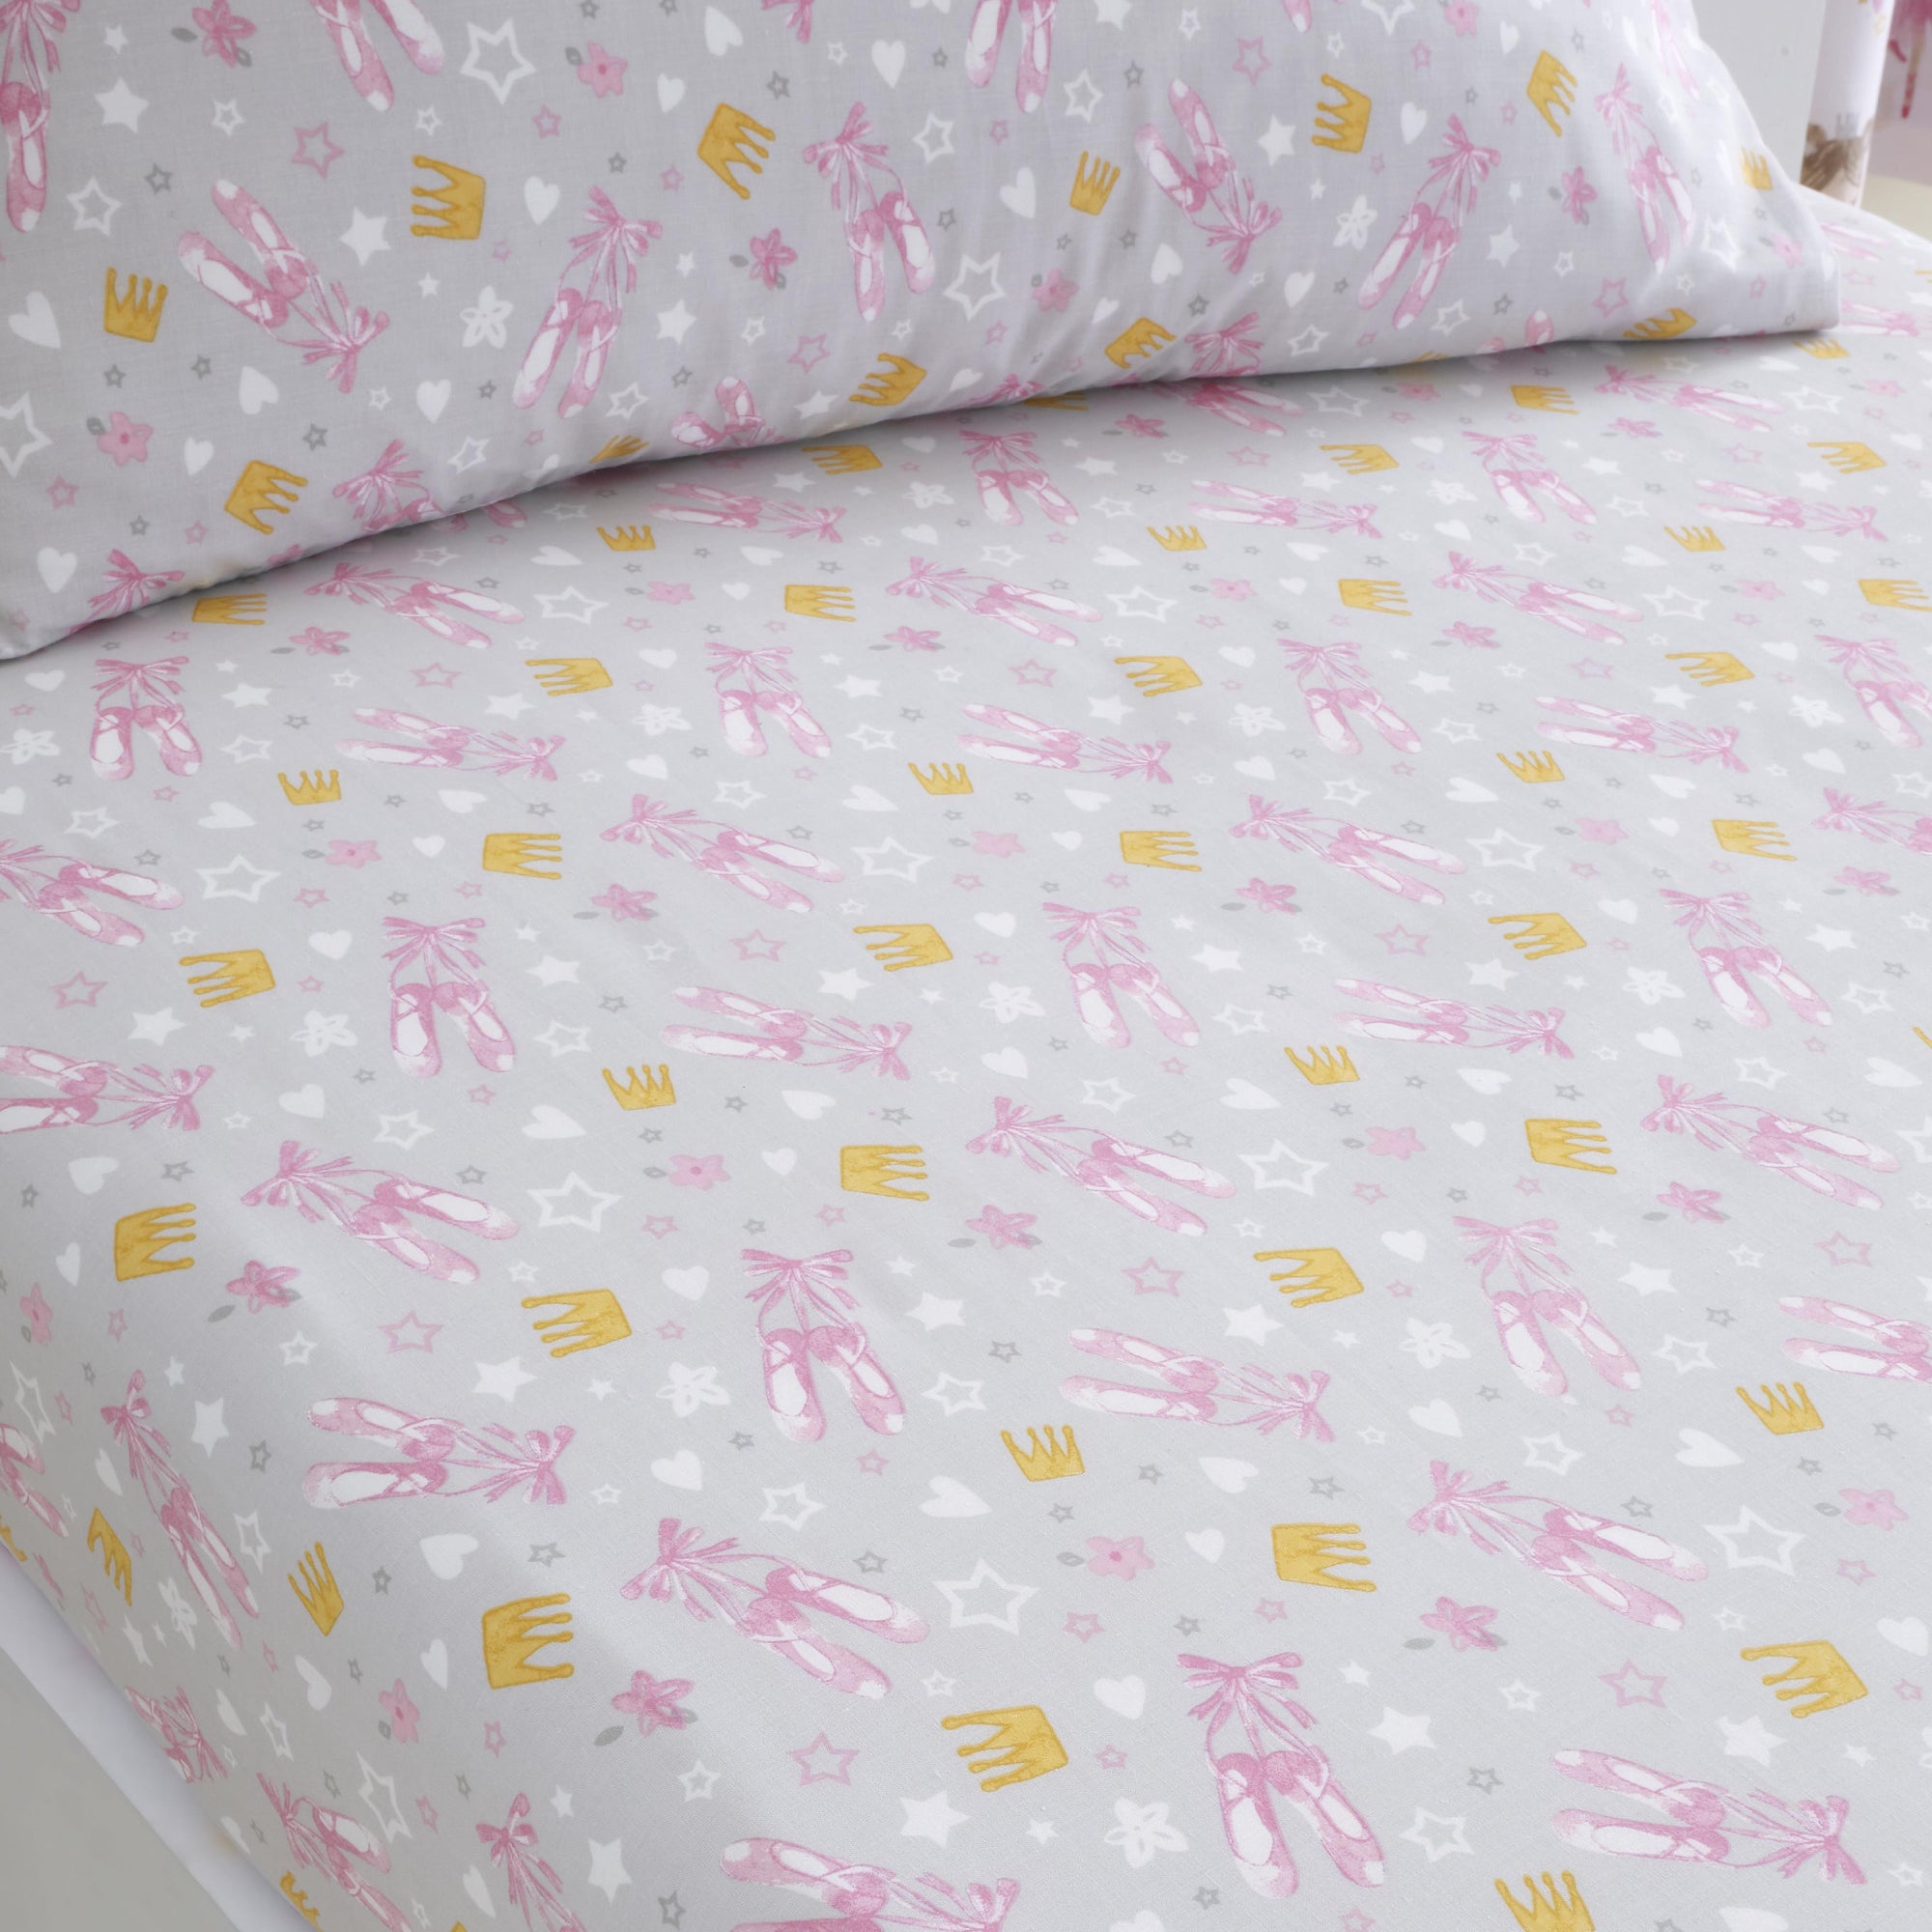 25cm Fitted Bed Sheet Ballet Dancer by Bedlam in Pink